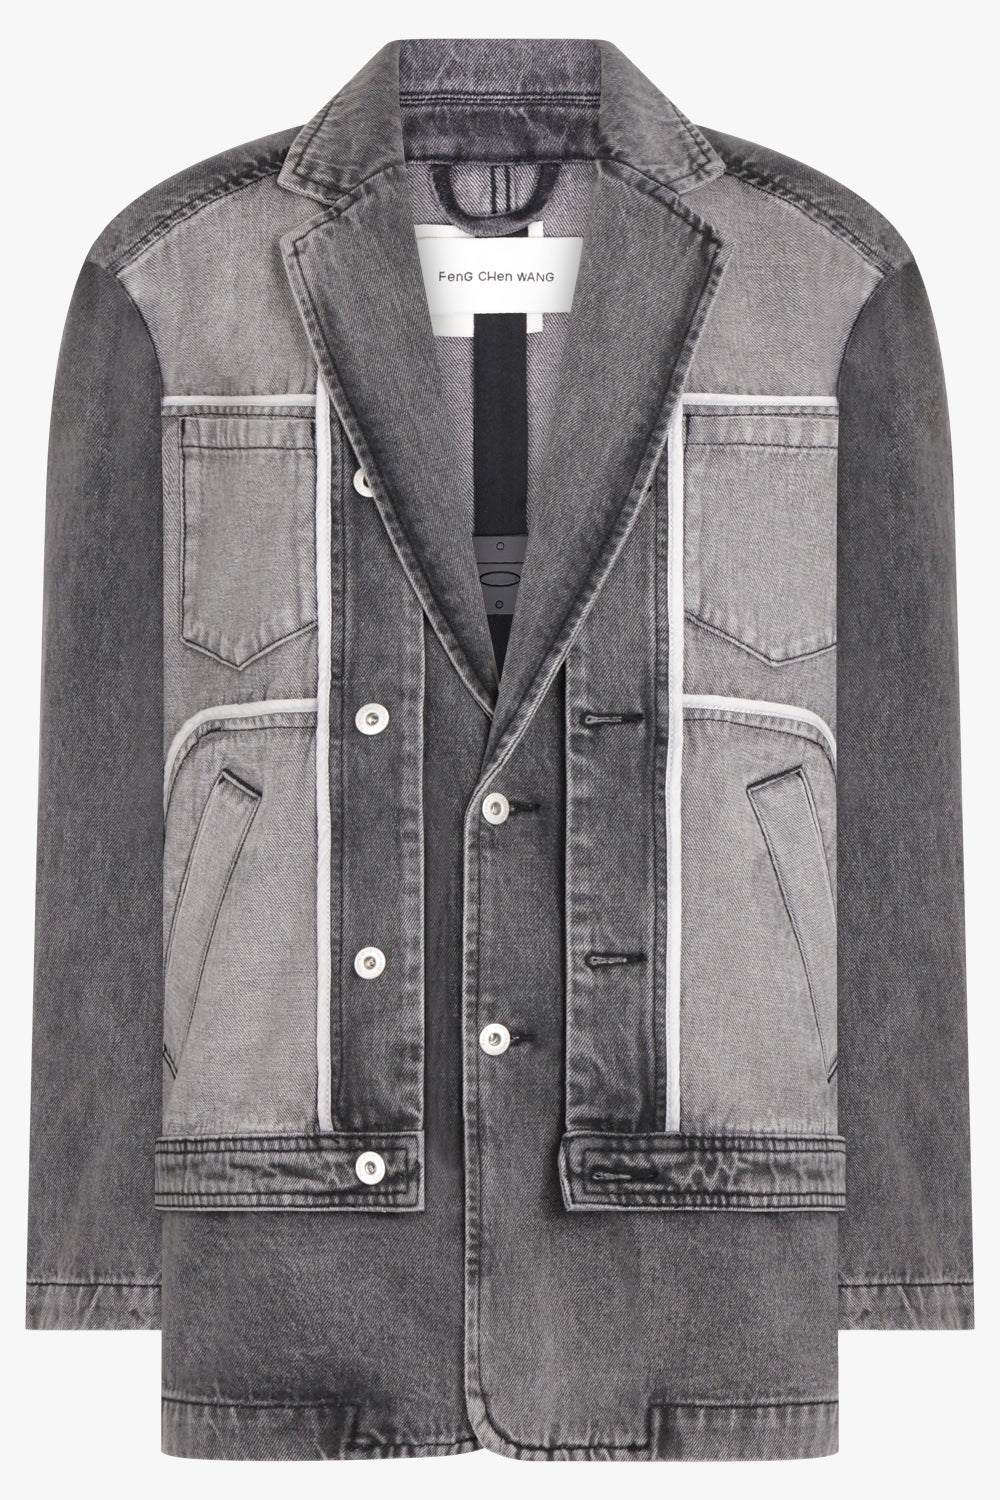 FENG CHEN WANG JACKETS INSIDE OUT PATCHED DENIM JACKET | BLACK